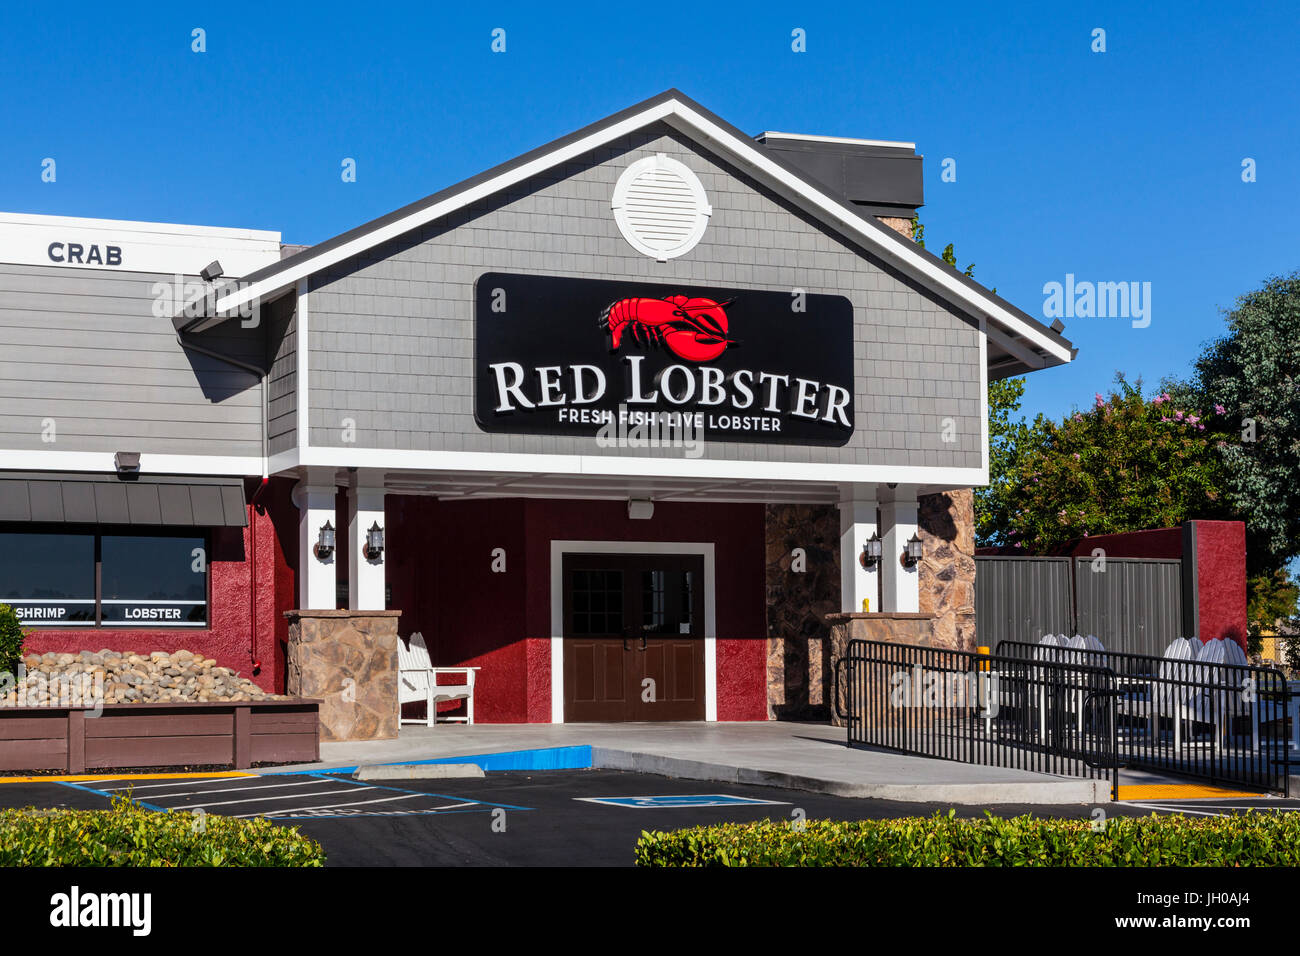 A Red Lobster Restaurant In Modesto California Stock Photo Alamy [ 956 x 1300 Pixel ]